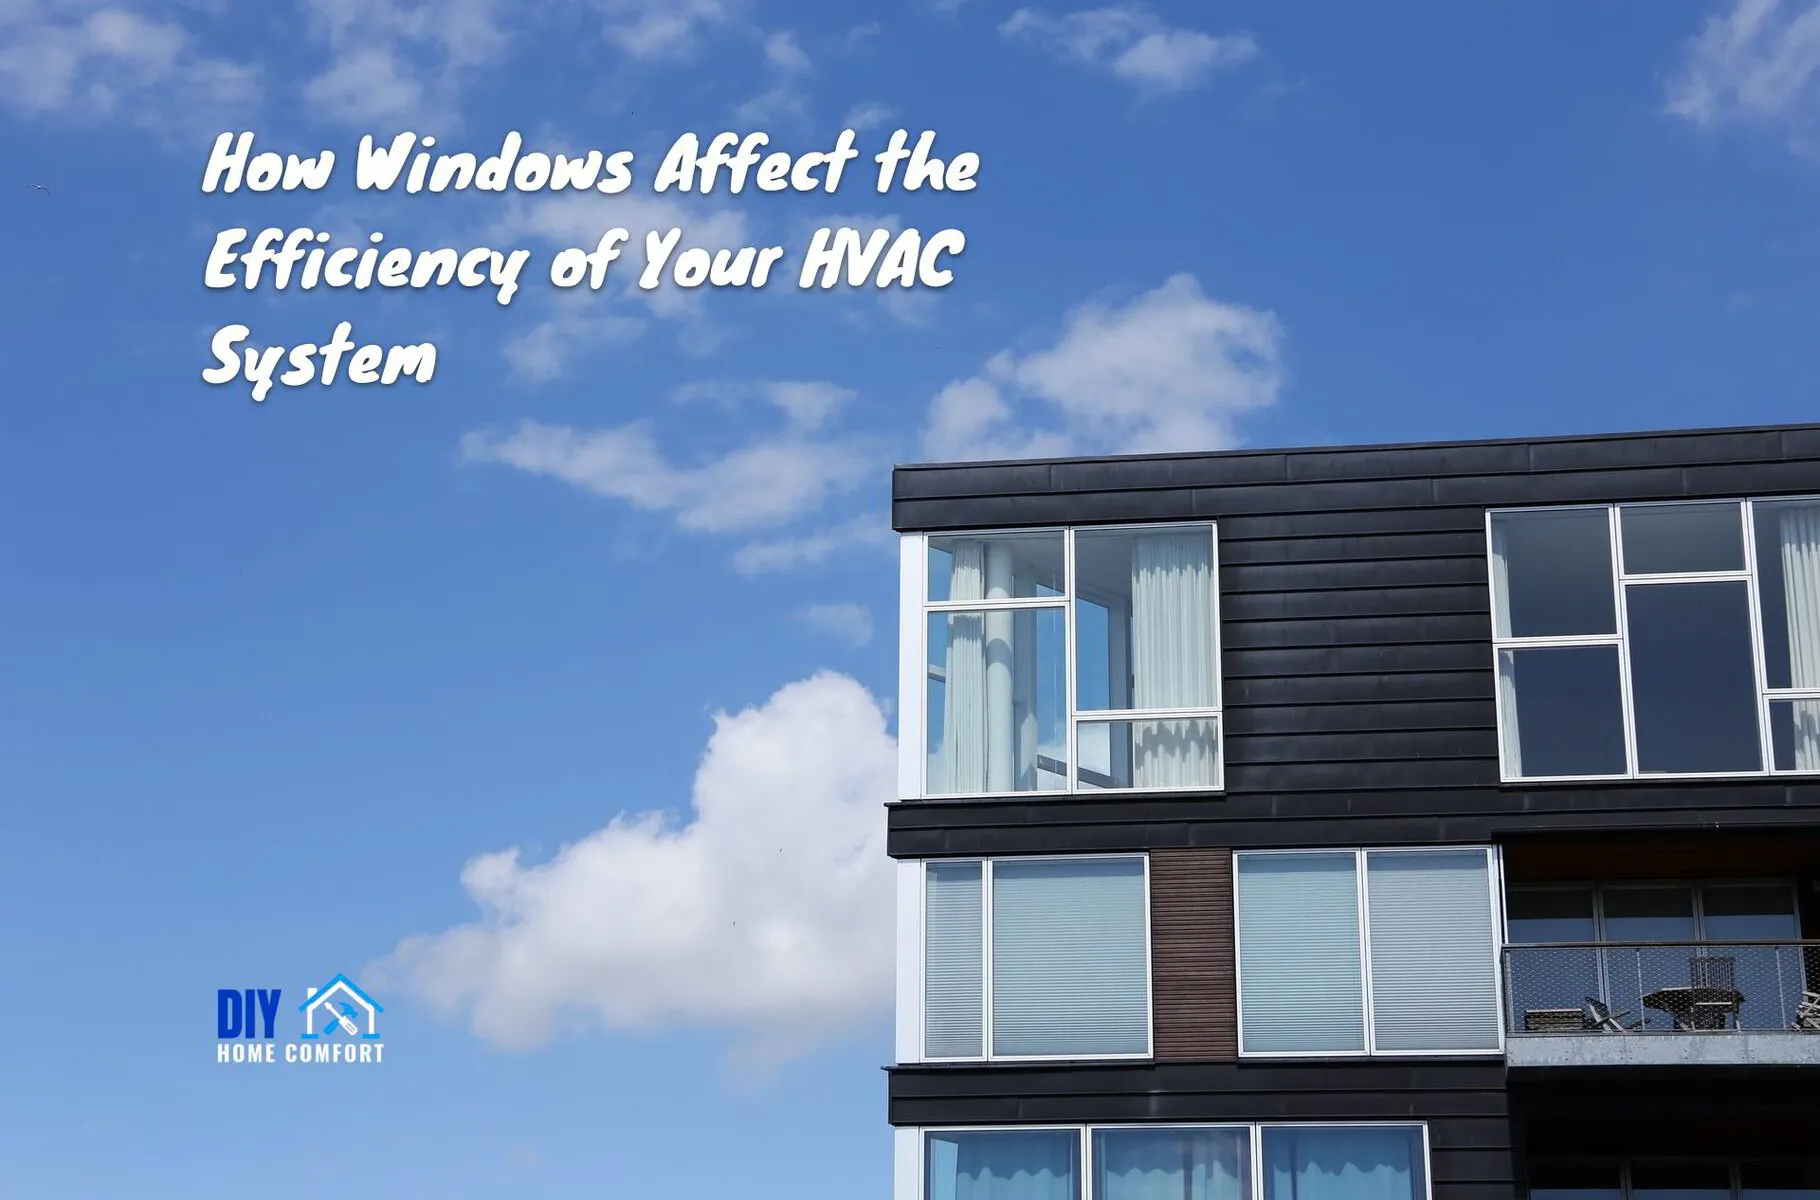 How Windows Affect the Efficiency of Your HVAC System | DIY Home Comfort